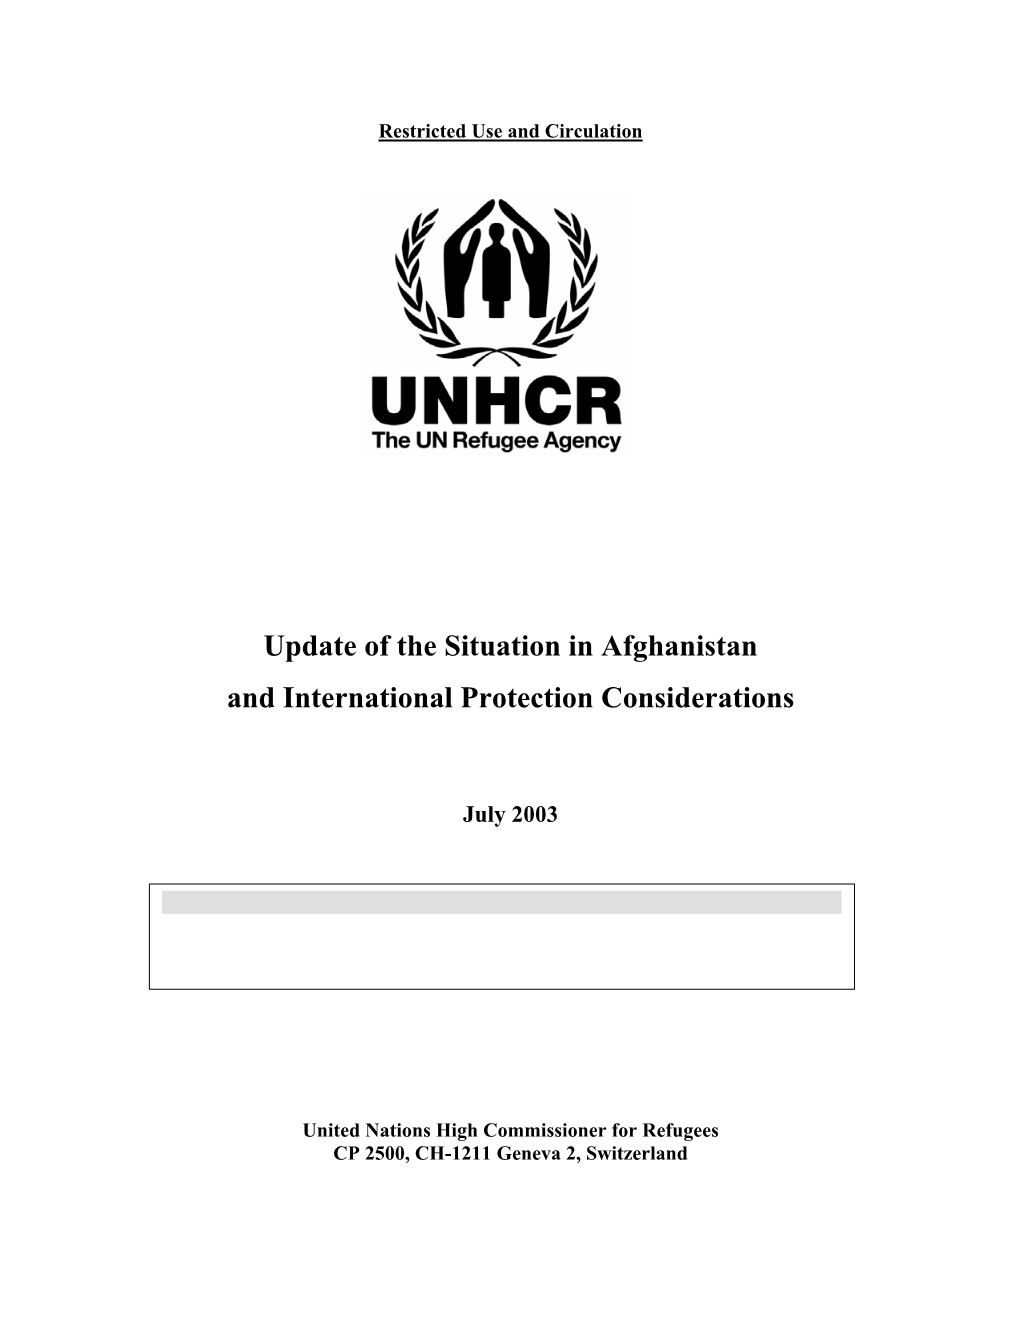 Update of the Situation in Afghanistan and International Protection Considerations